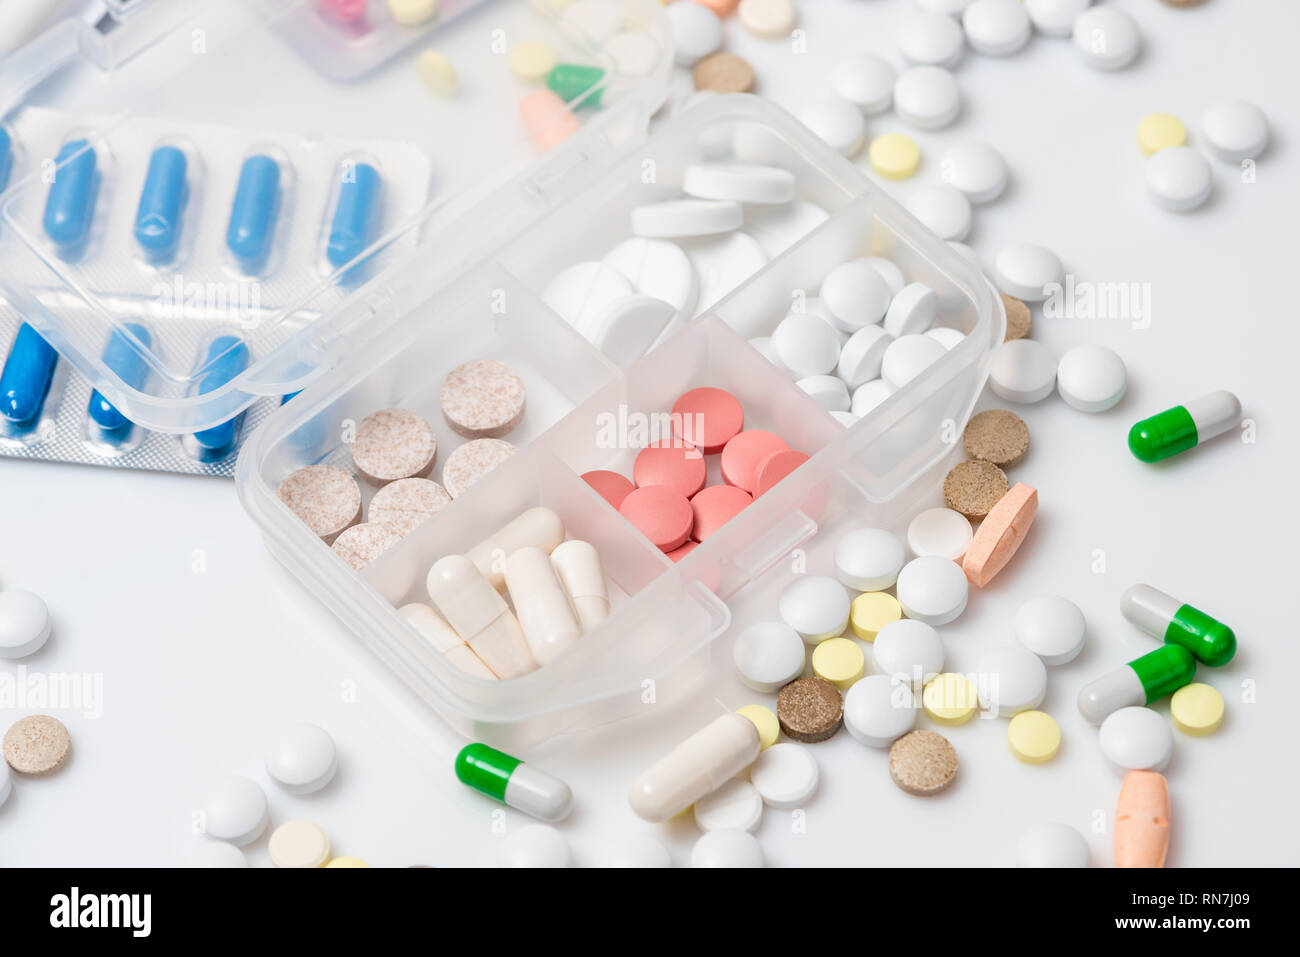 Close-up of pill case with various colorful medications on white background. Stock Photo